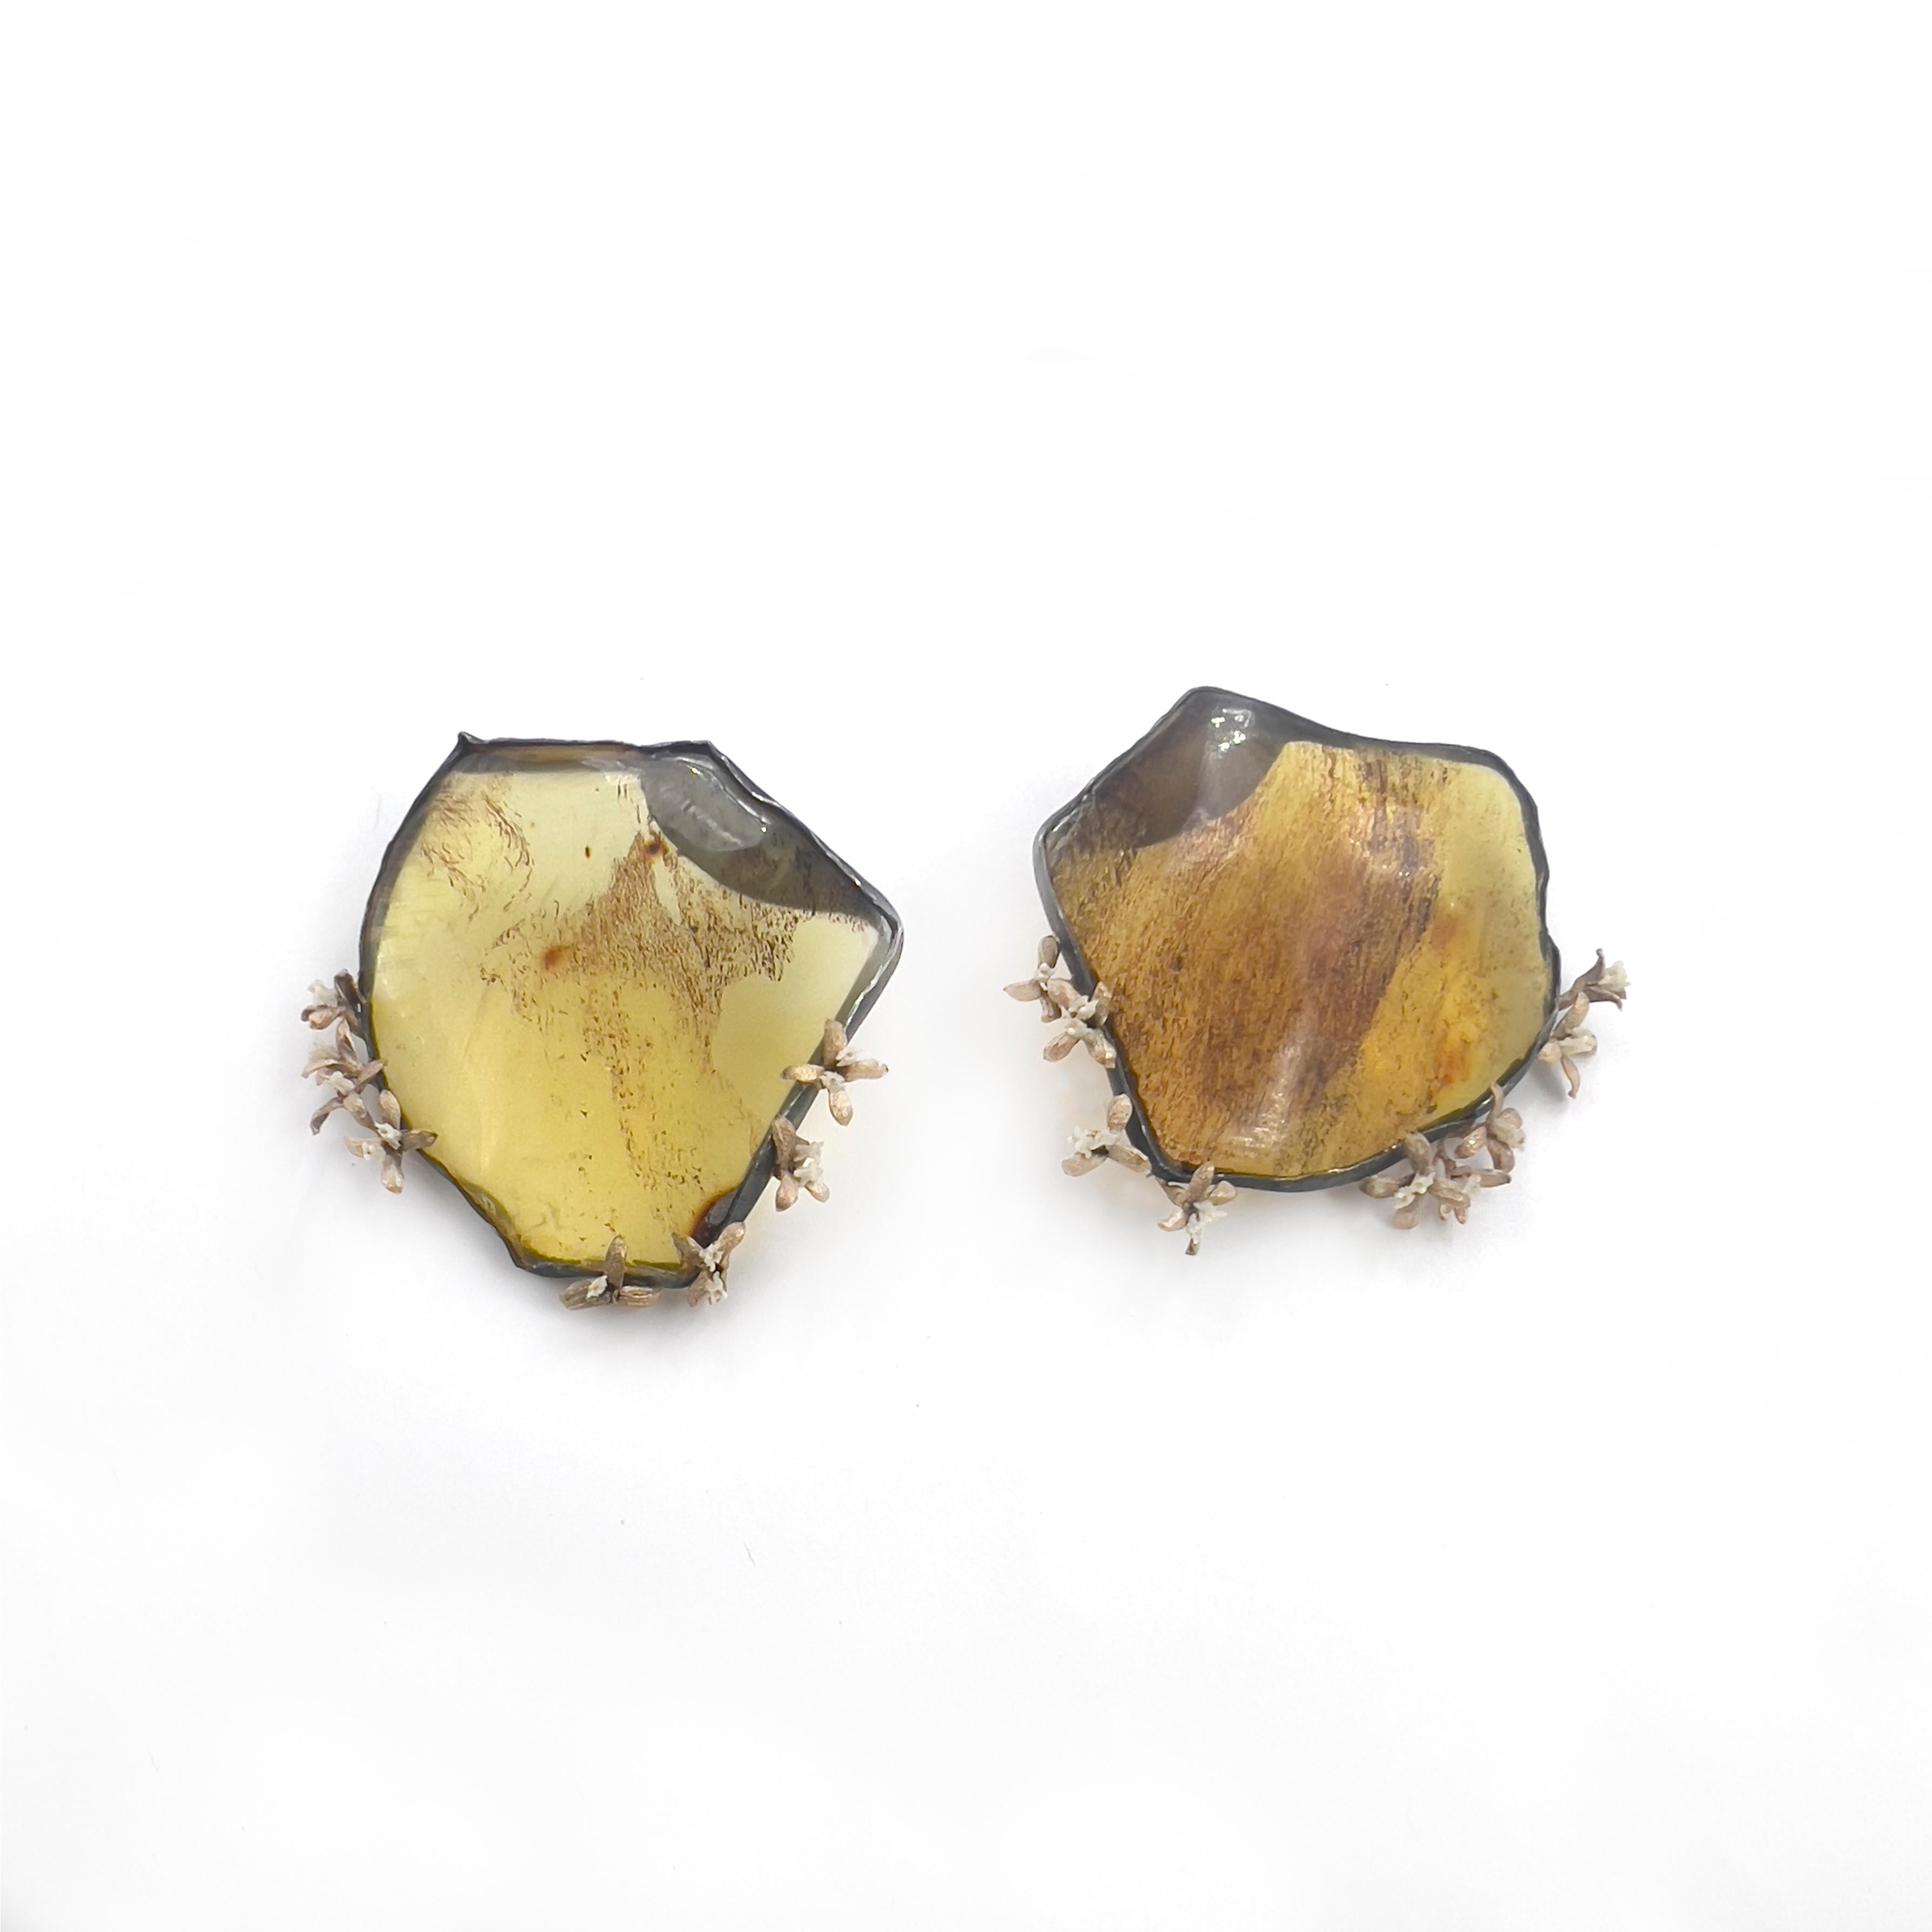 These one-of-a-kind earrings pair the warmth of amber with a delicate touch of snake vertebrae. Each pair is meticulously crafted with recycled 14k yellow gold and silver, ensuring both elegance and sustainability. The cast privot adds a touch of